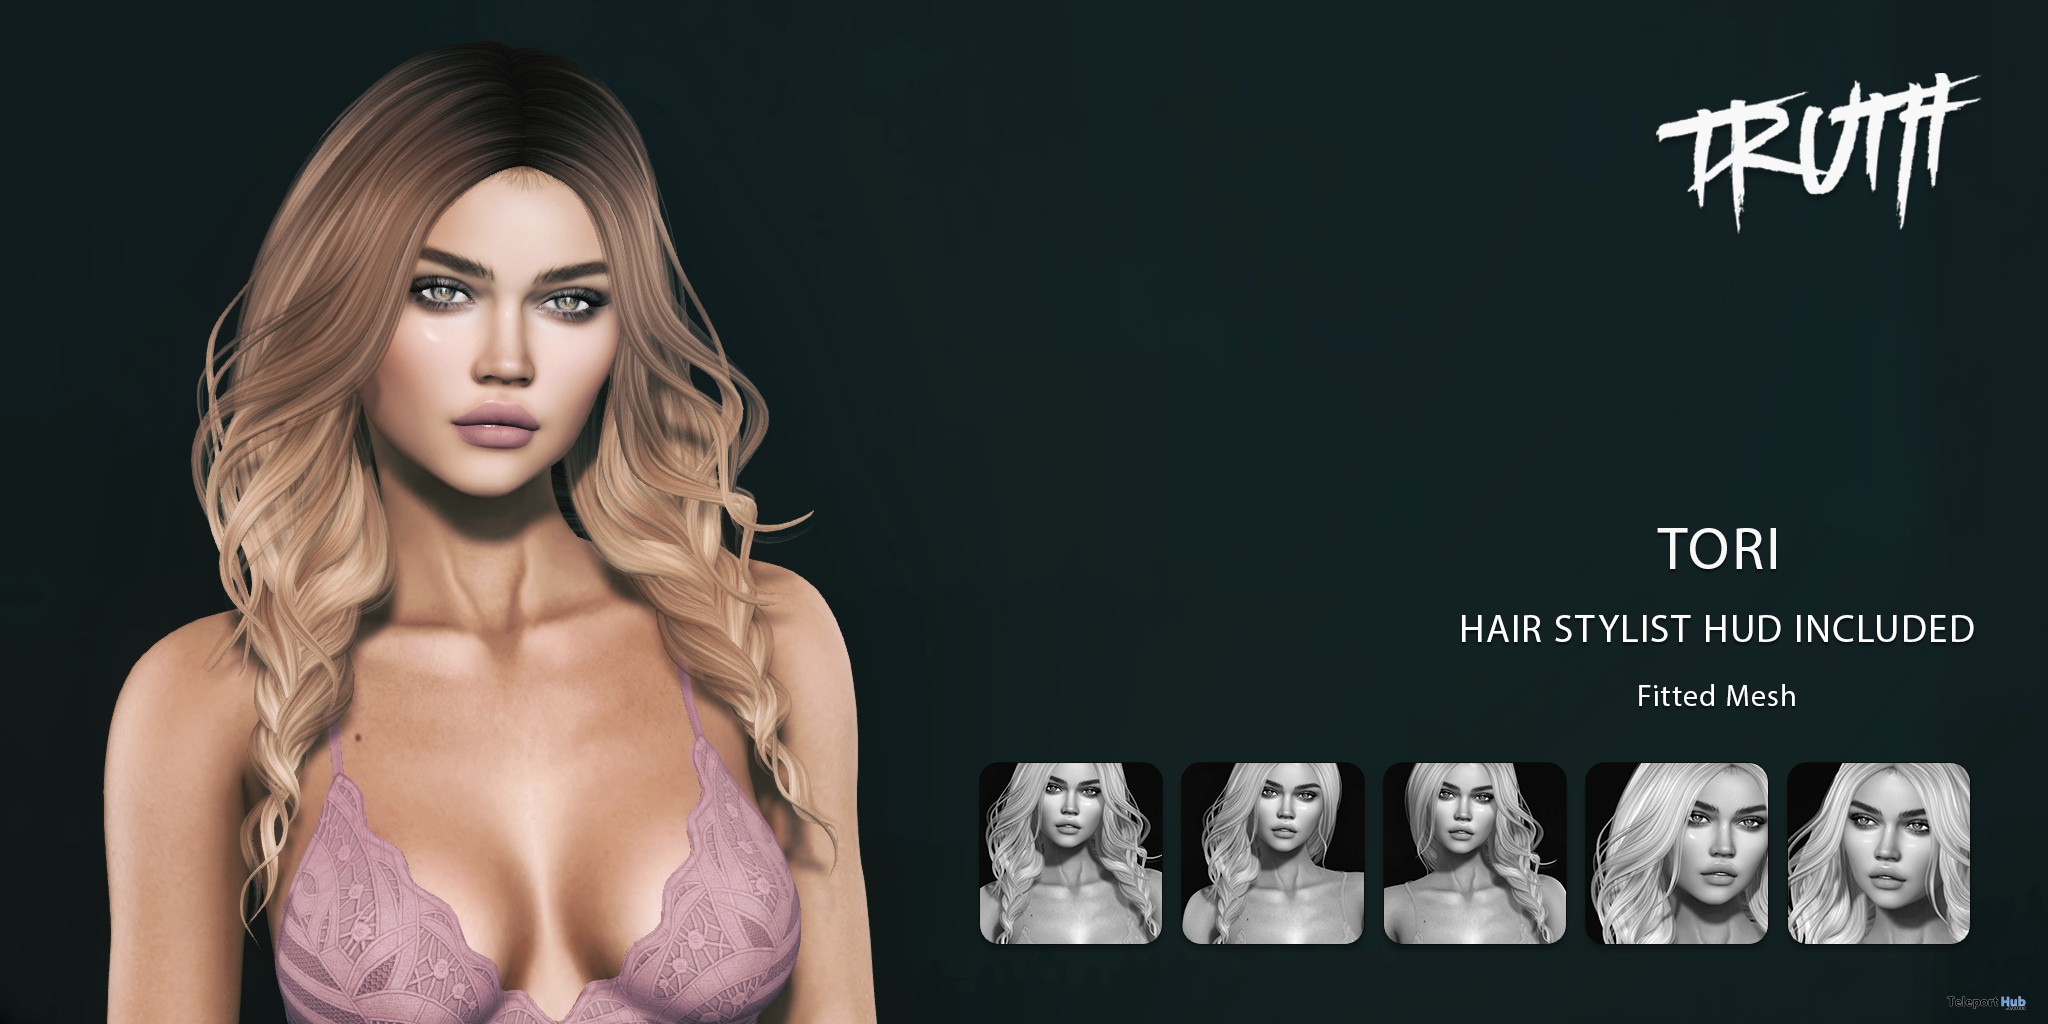 Tori Hair With Stylist HUD July 2017 VIP Group Gift by TRUTH HAIR - Teleport Hub - teleporthub.com